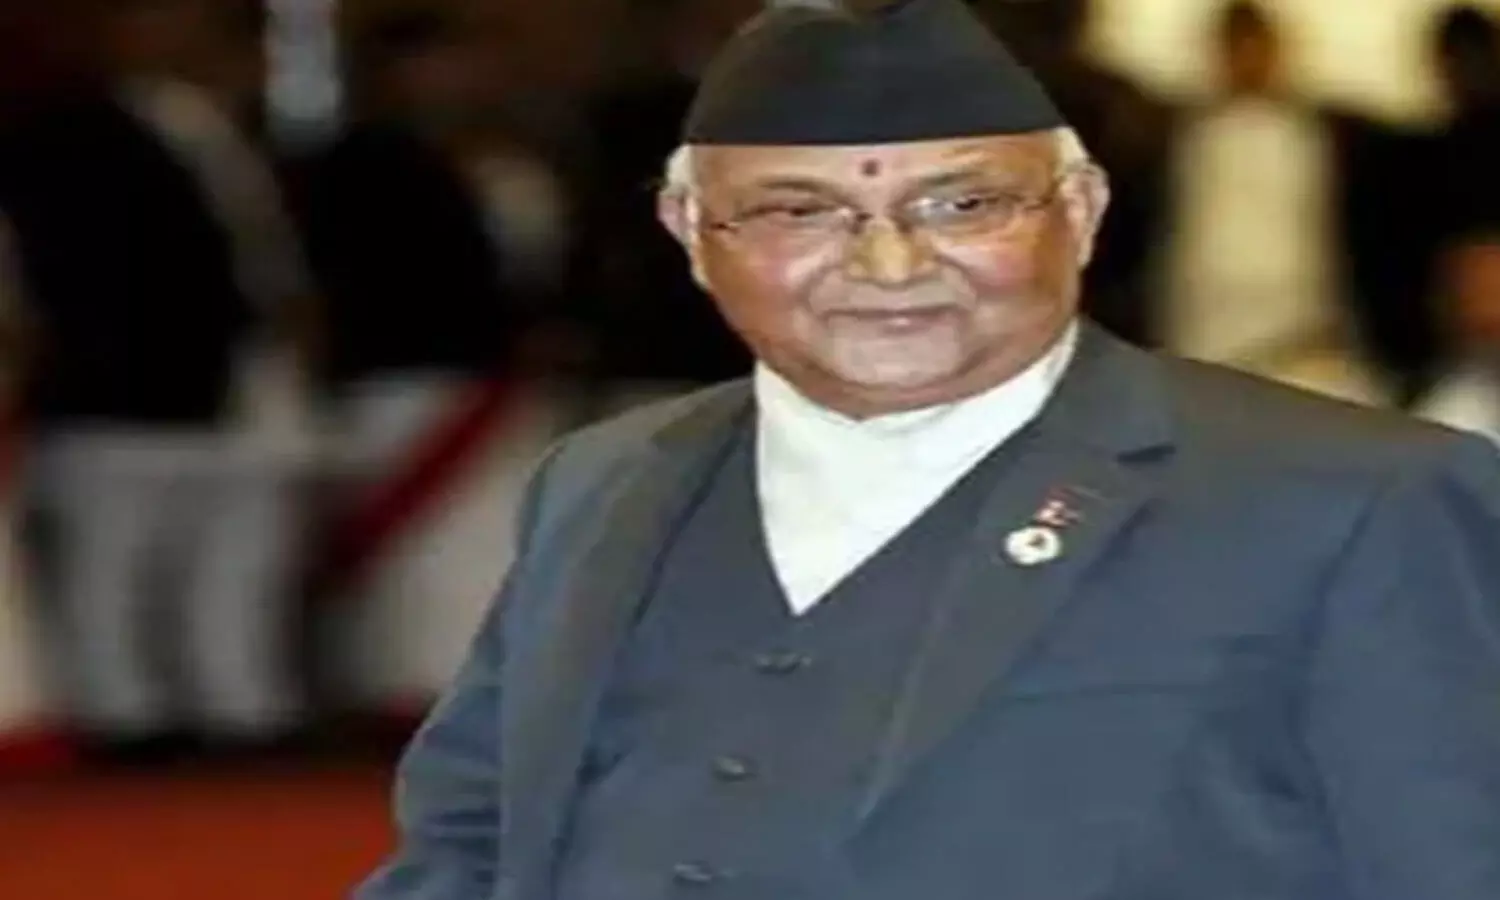 KP Sharma Oli again gives controversial statement says Yoga originated in Nepal, Not India